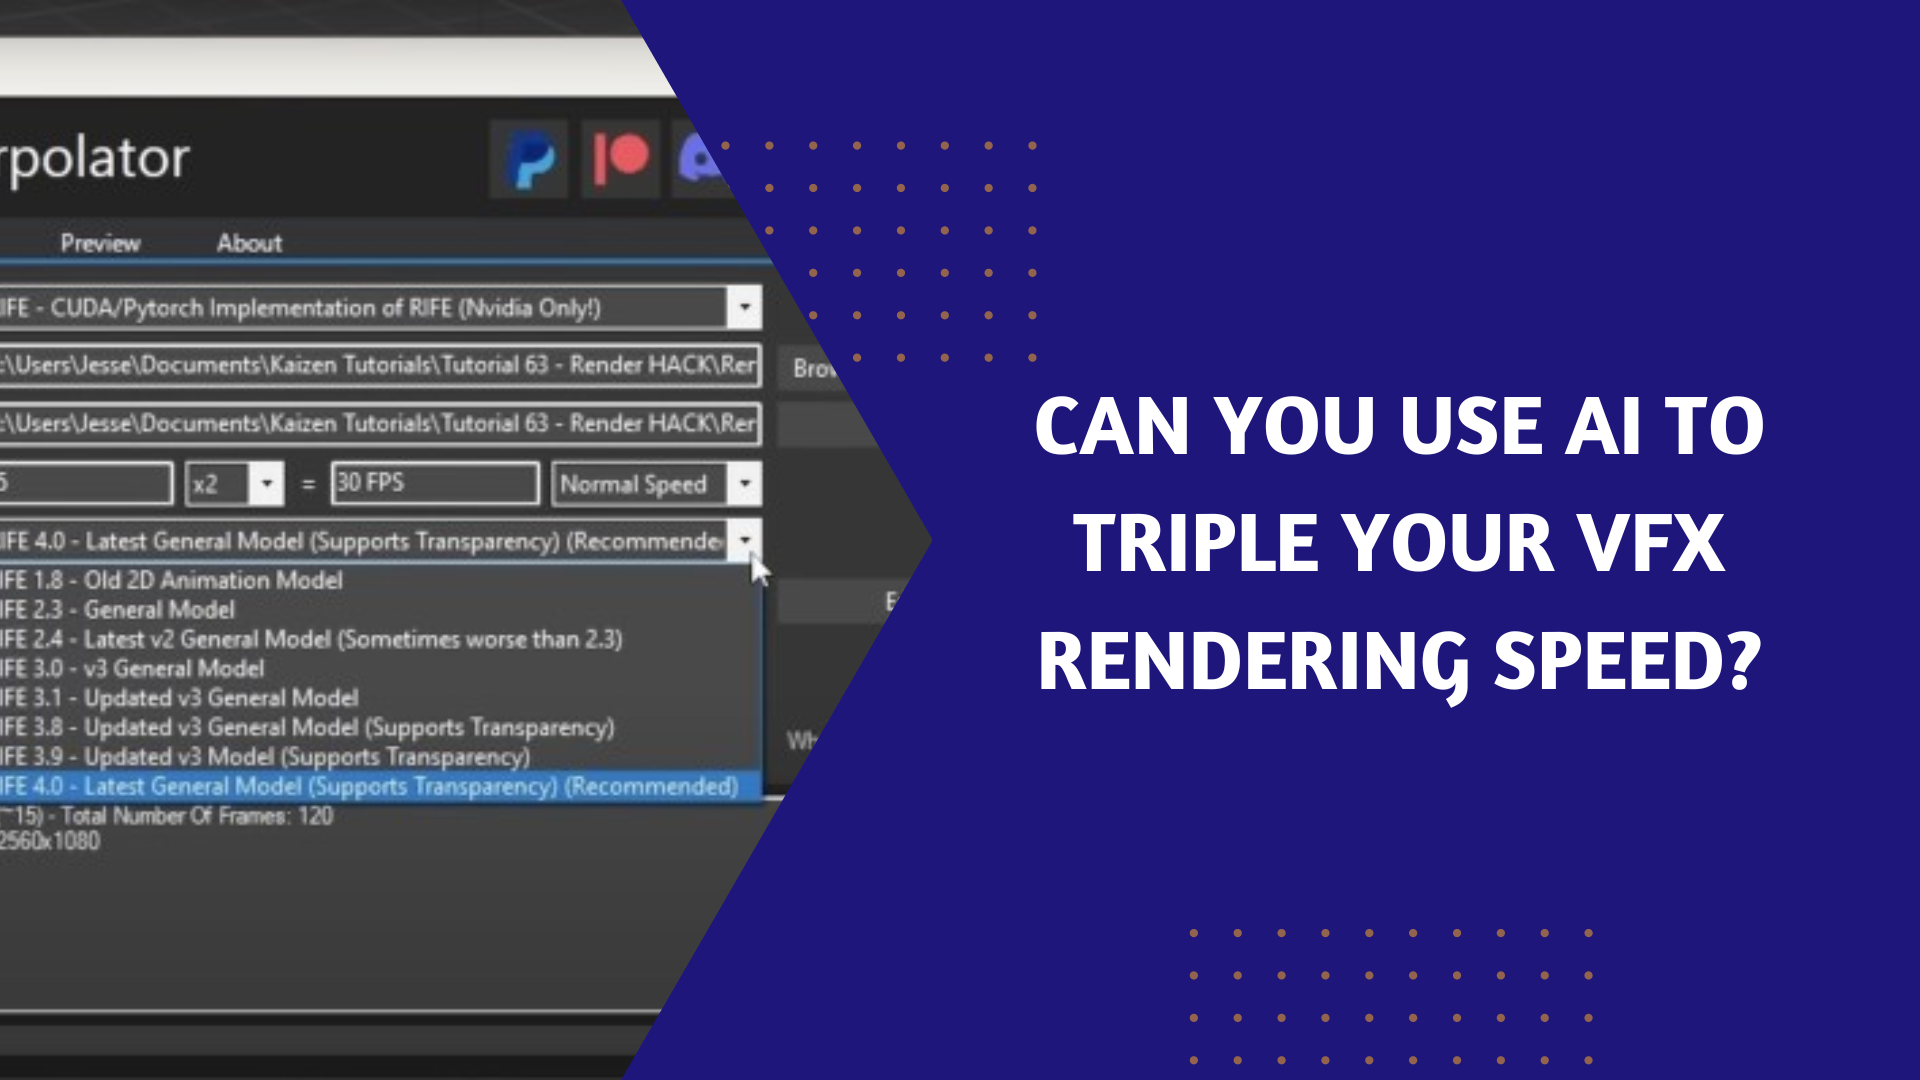 Can you use AI to triple your VFX rendering speed?